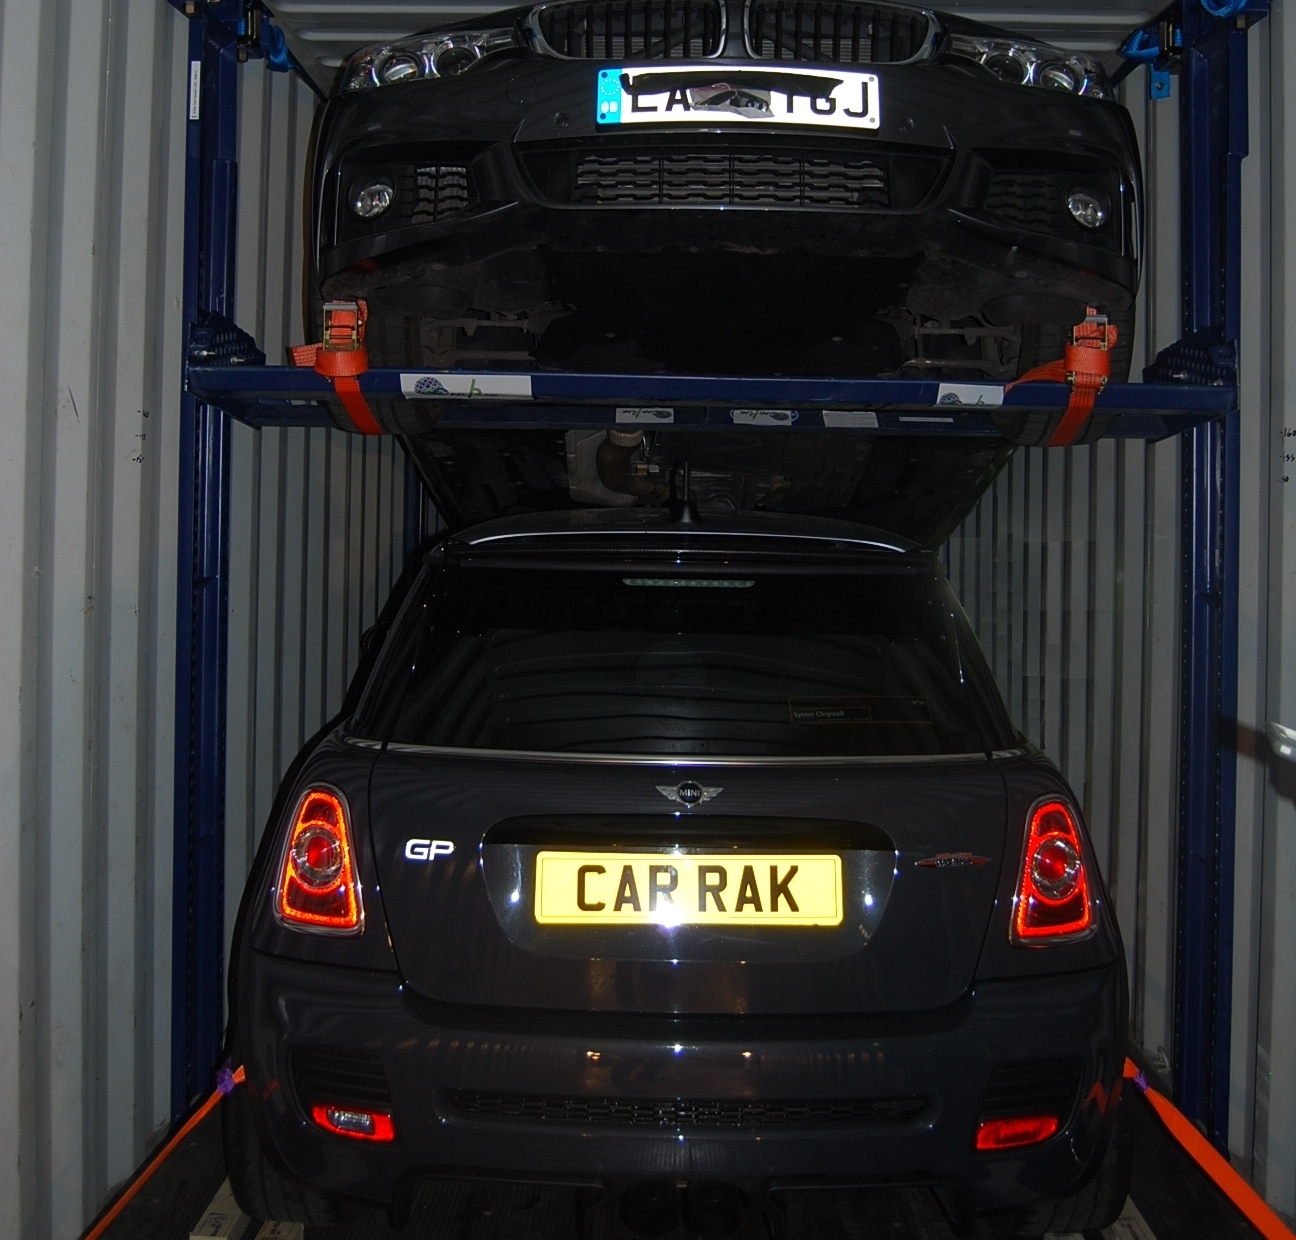 car shipping, step by step guide, loading 4 cars in 1 container, ccs, c.c.s.